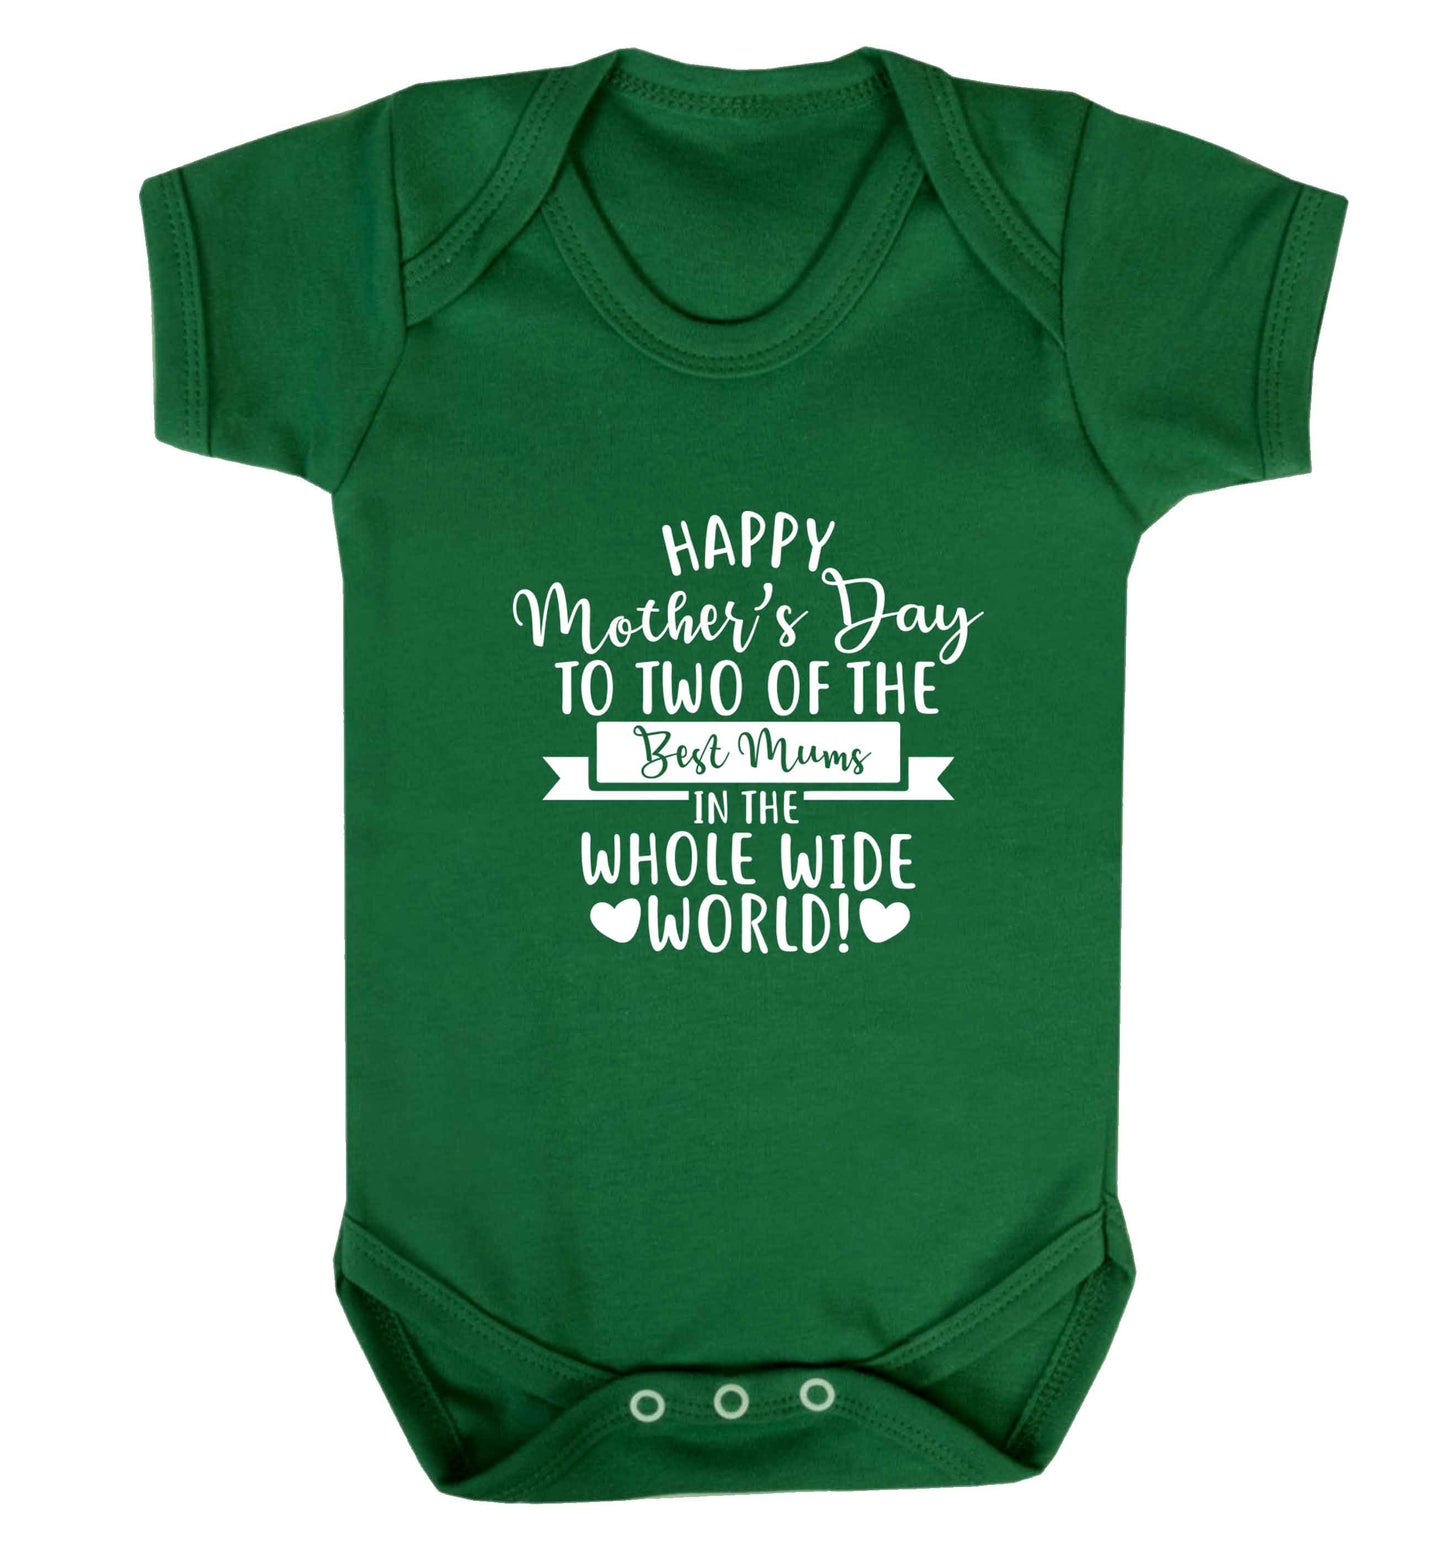 Happy mother's day to two of the best mums in the whole wide world baby vest green 18-24 months